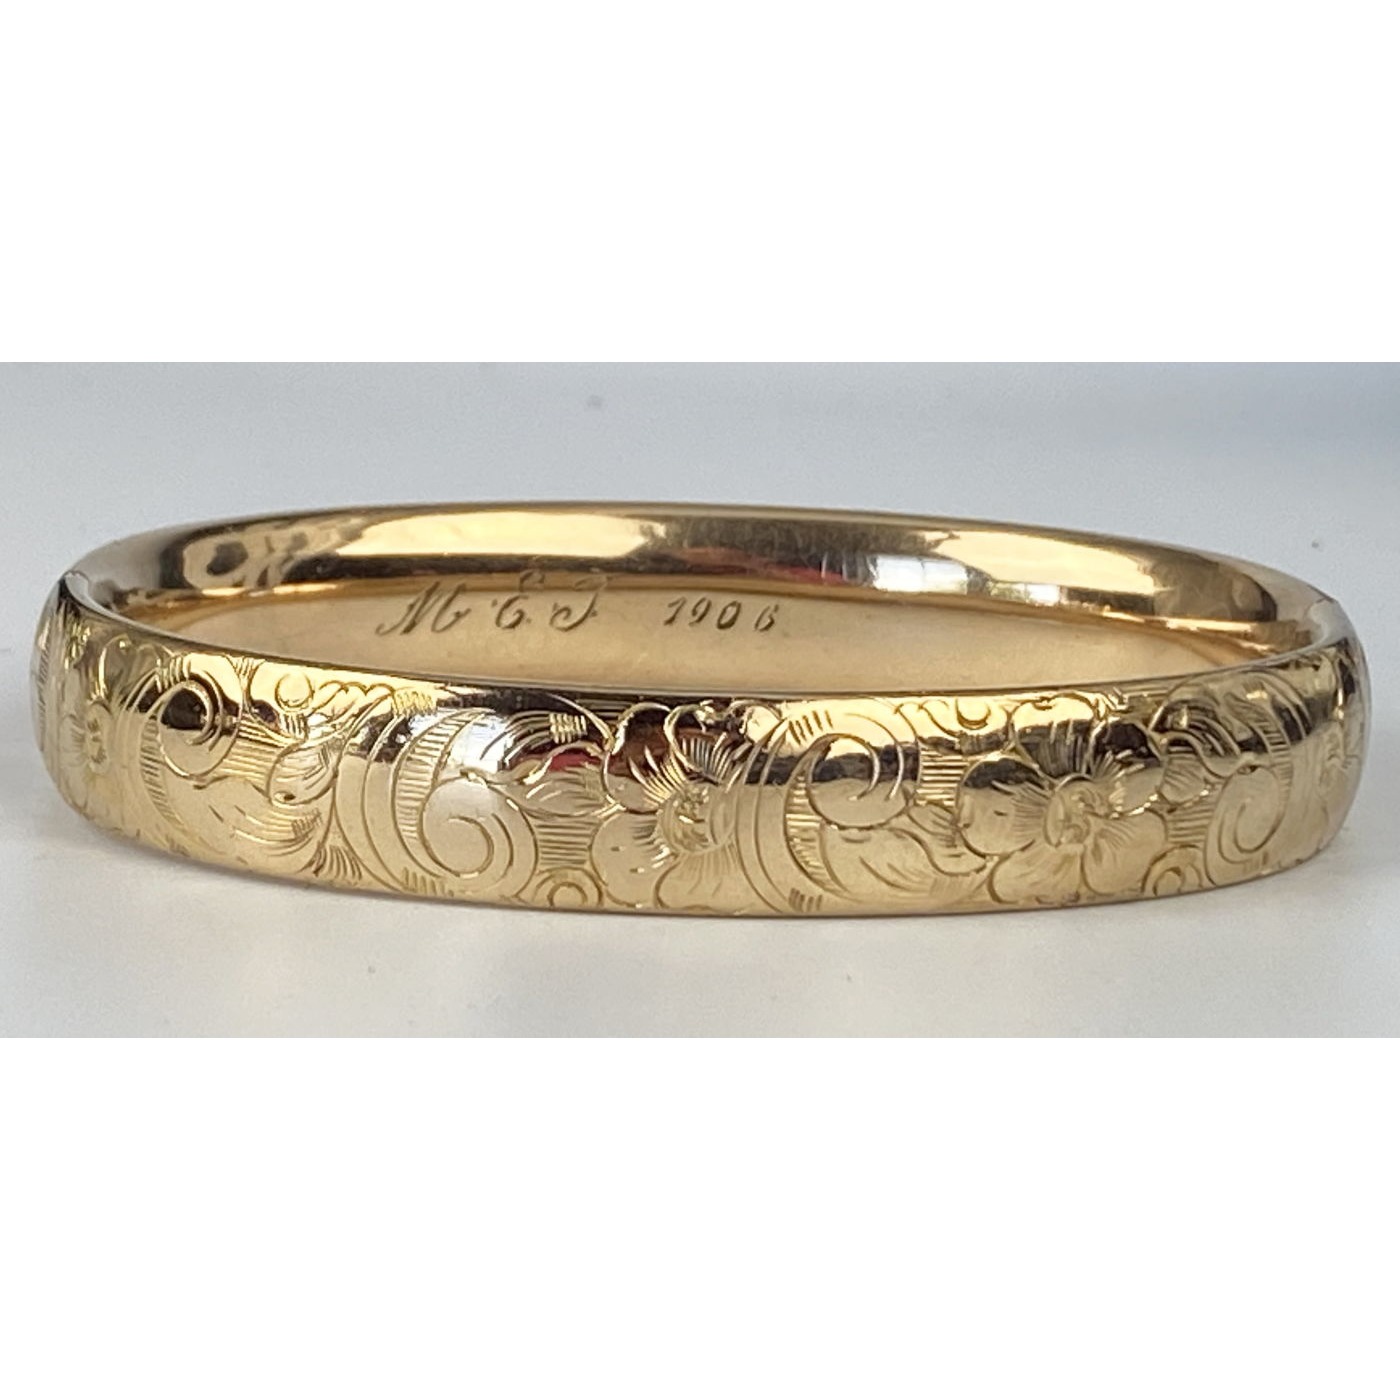 Larger Wrist All Around Floral Scroll Engagement Bangle